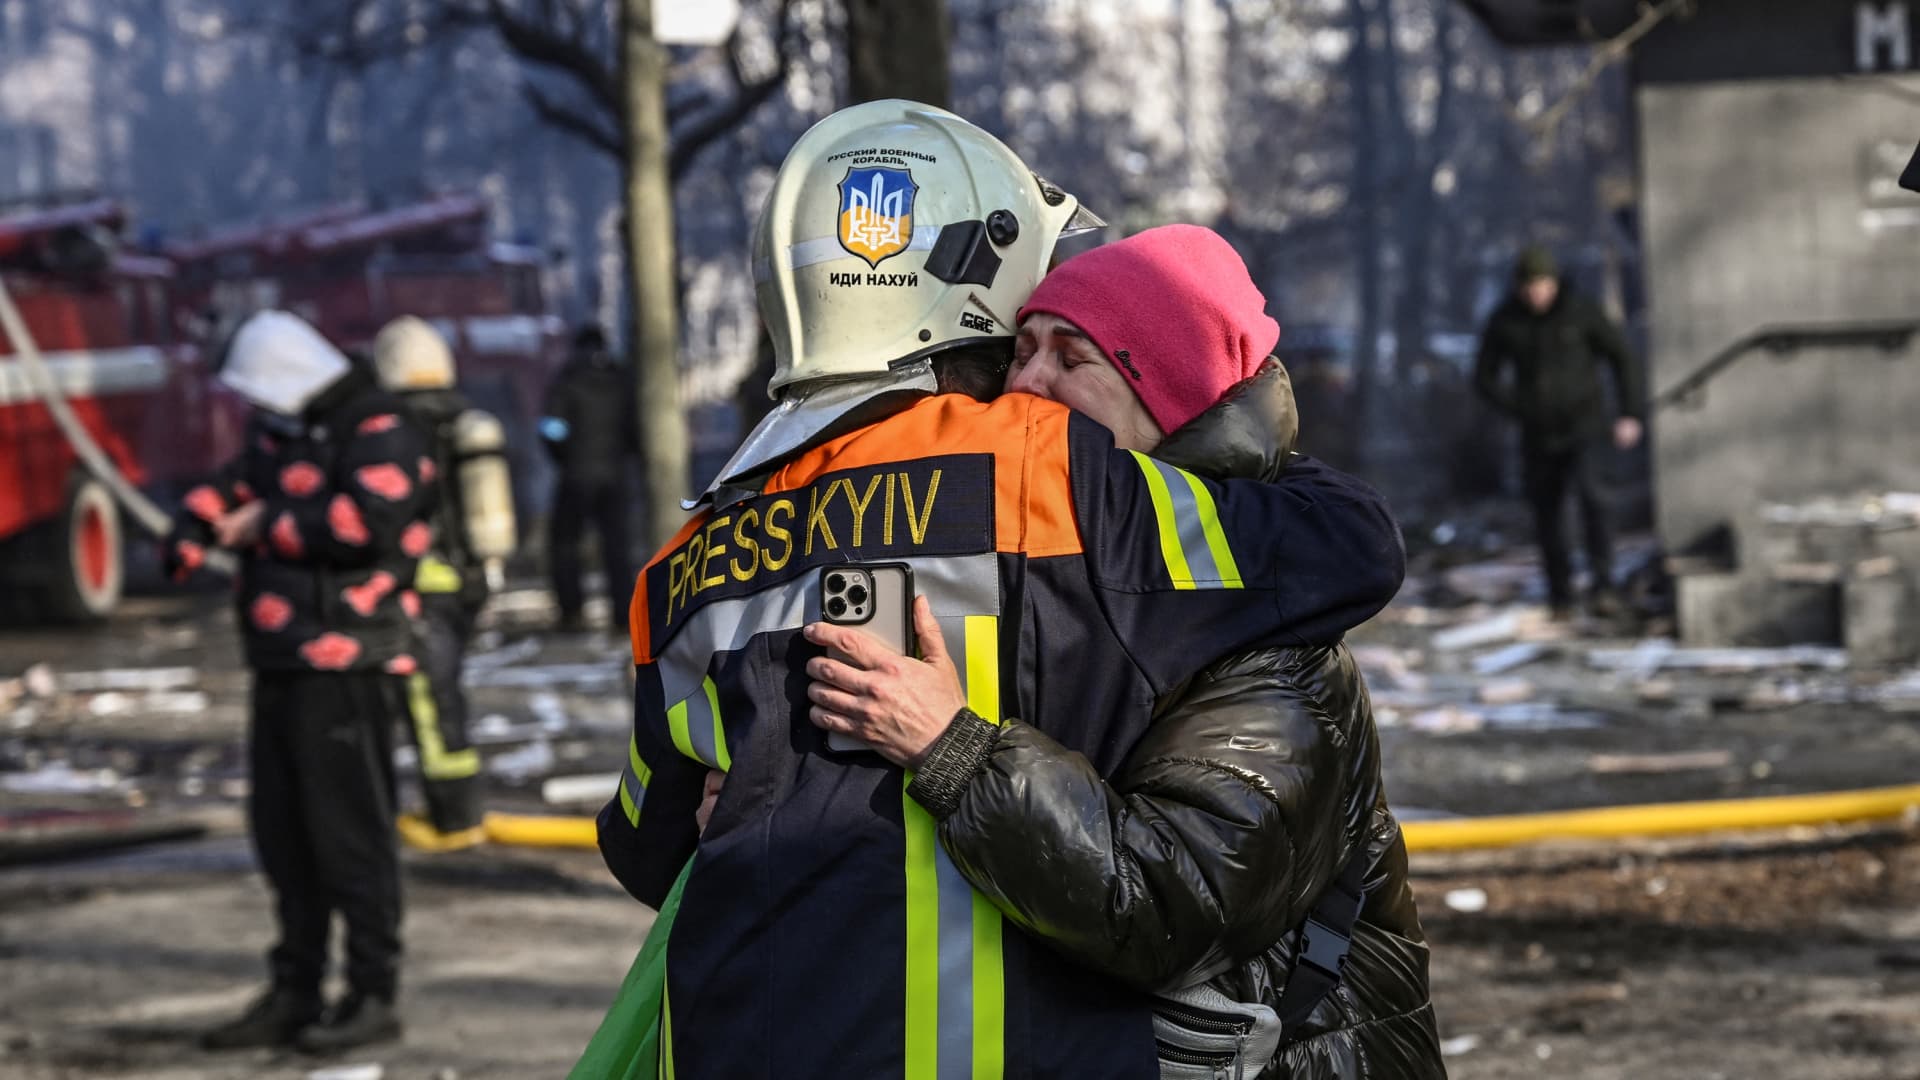 A fireman embraces a woman outside a damaged apartment building in Kyiv on March 15, 2022, after strikes on residential areas killed at least two people, Ukraine emergency services said as Russian troops intensified their attacks on the Ukrainian capital.